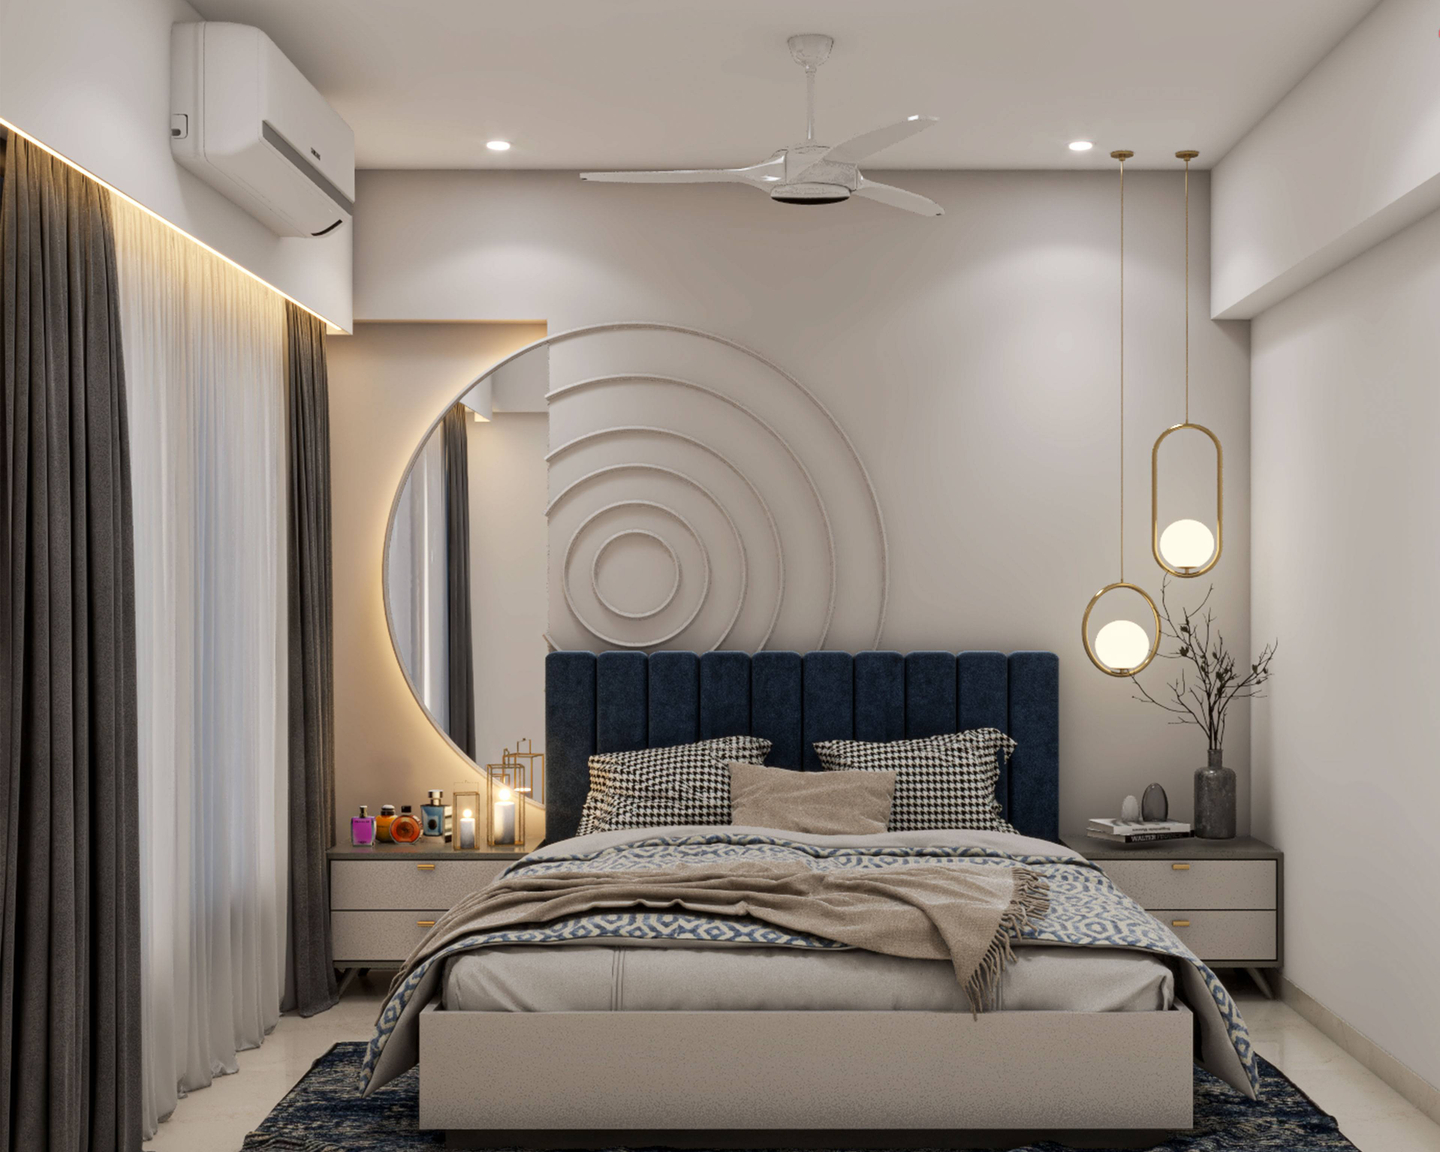 Modern Bedroom Design With A Double Bed - Livspace